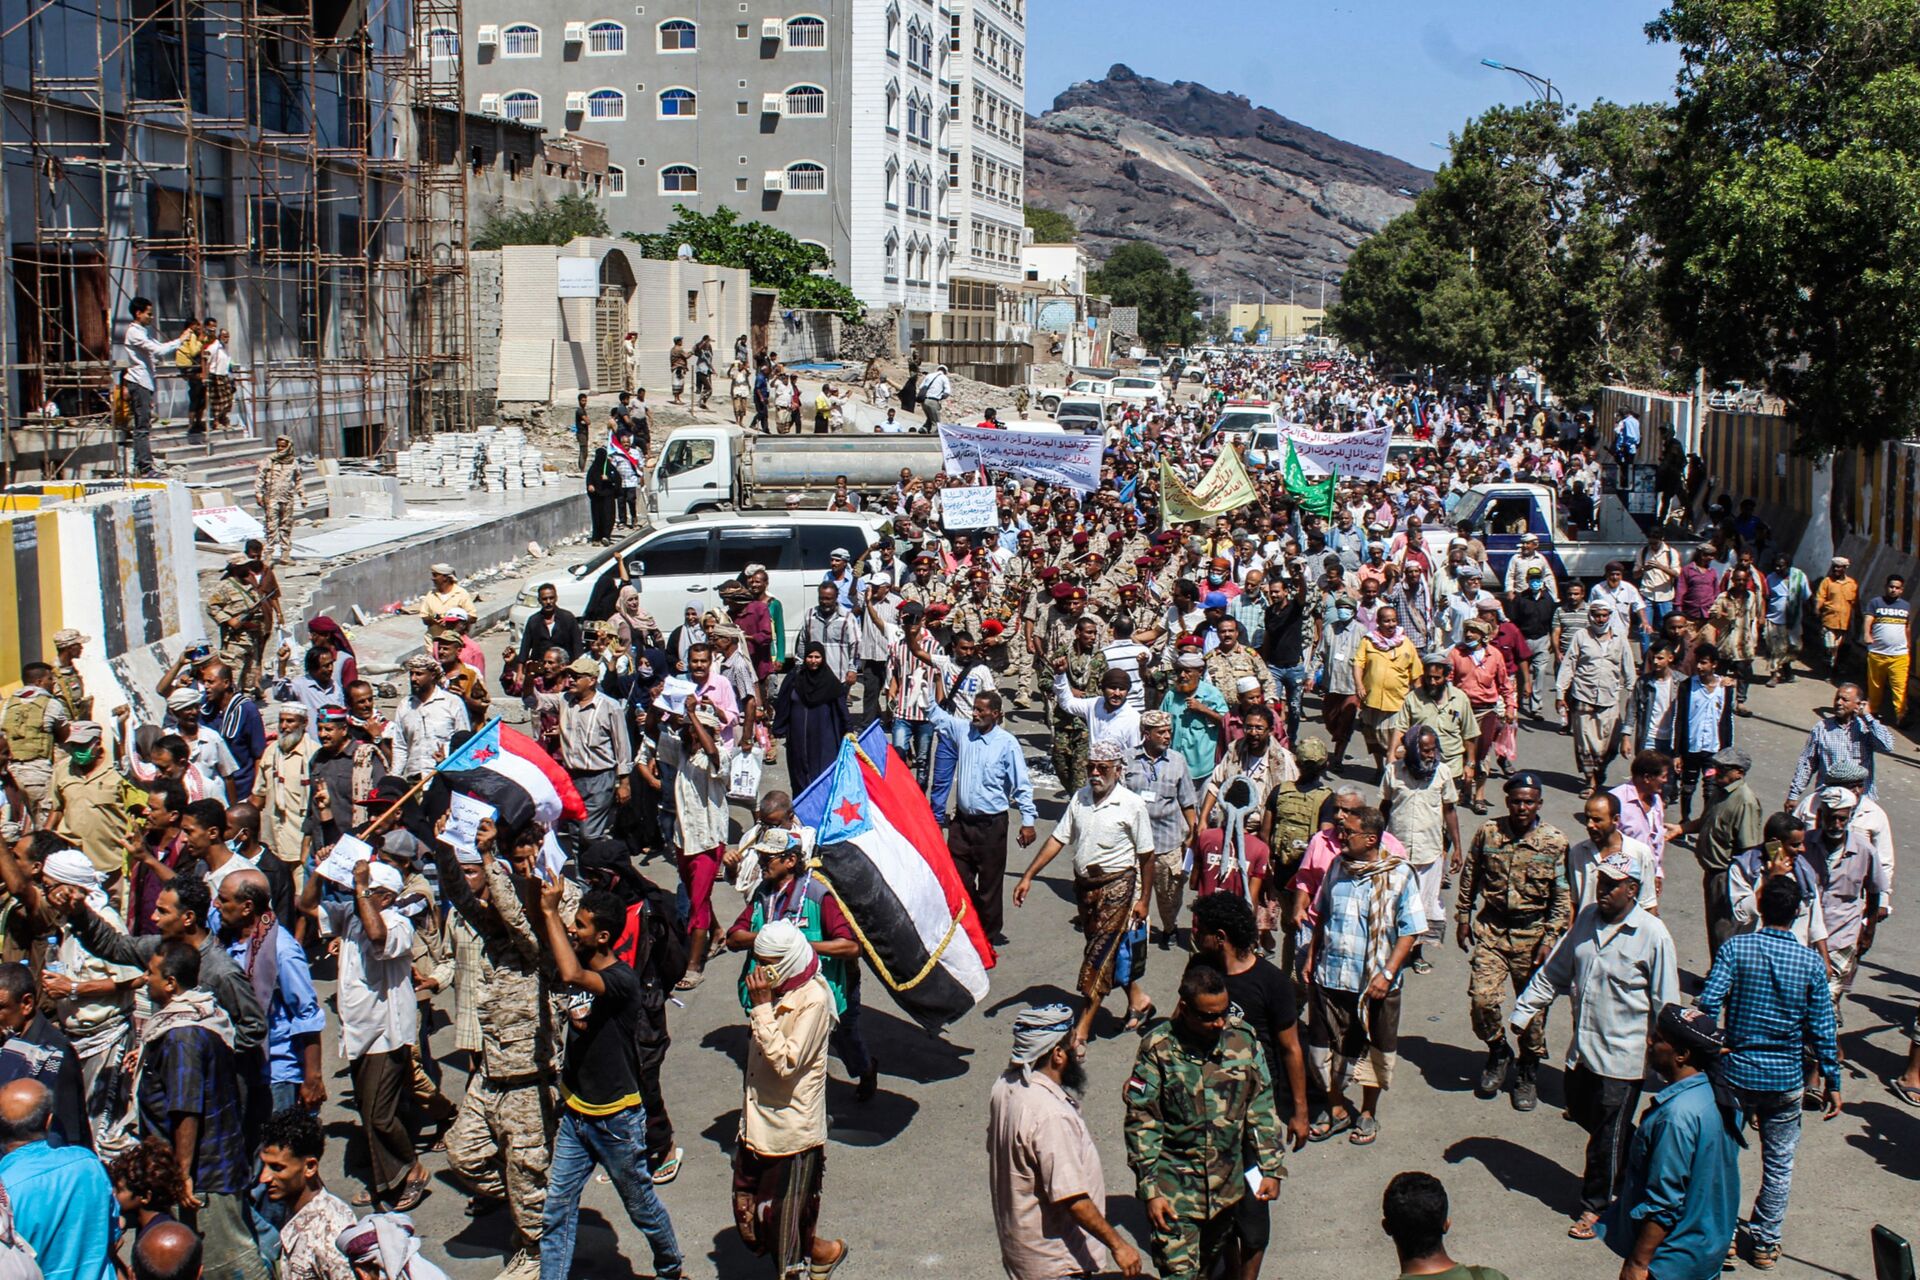 Protesters, some raising the old flag of South Yemen, gather to demonstrate against deteriorating services and economic conditions, outside the internationally-recognised Yemeni government's headquarters at al-Maashiq Palace in the Crater district of the southern port city of Aden on March 16, 2021 - Sputnik International, 1920, 07.09.2021